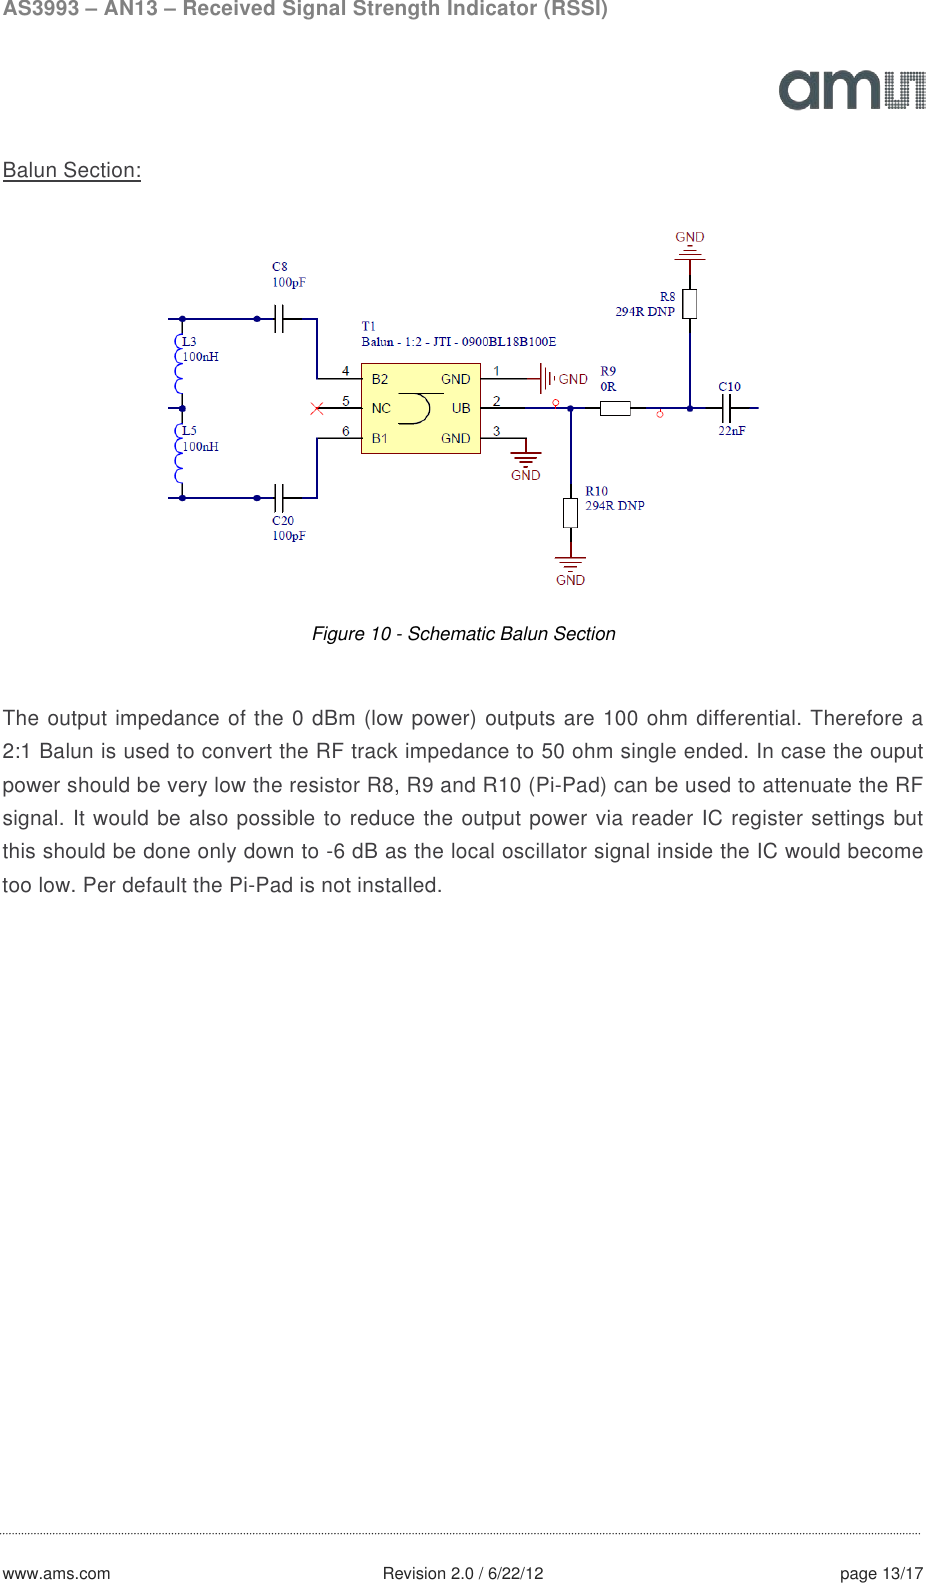 AS3993 – AN13 – Received Signal Strength Indicator (RSSI)  www.ams.com              Revision 2.0 / 6/22/12 page 13/17  Balun Section:  Figure 10 - Schematic Balun Section  The output impedance of the 0 dBm (low power) outputs are 100 ohm differential. Therefore a 2:1 Balun is used to convert the RF track impedance to 50 ohm single ended. In case the ouput power should be very low the resistor R8, R9 and R10 (Pi-Pad) can be used to attenuate the RF signal. It would be also possible to reduce the output power via reader IC register settings but this should be done only down to -6 dB as the local oscillator signal inside the IC would become too low. Per default the Pi-Pad is not installed.   